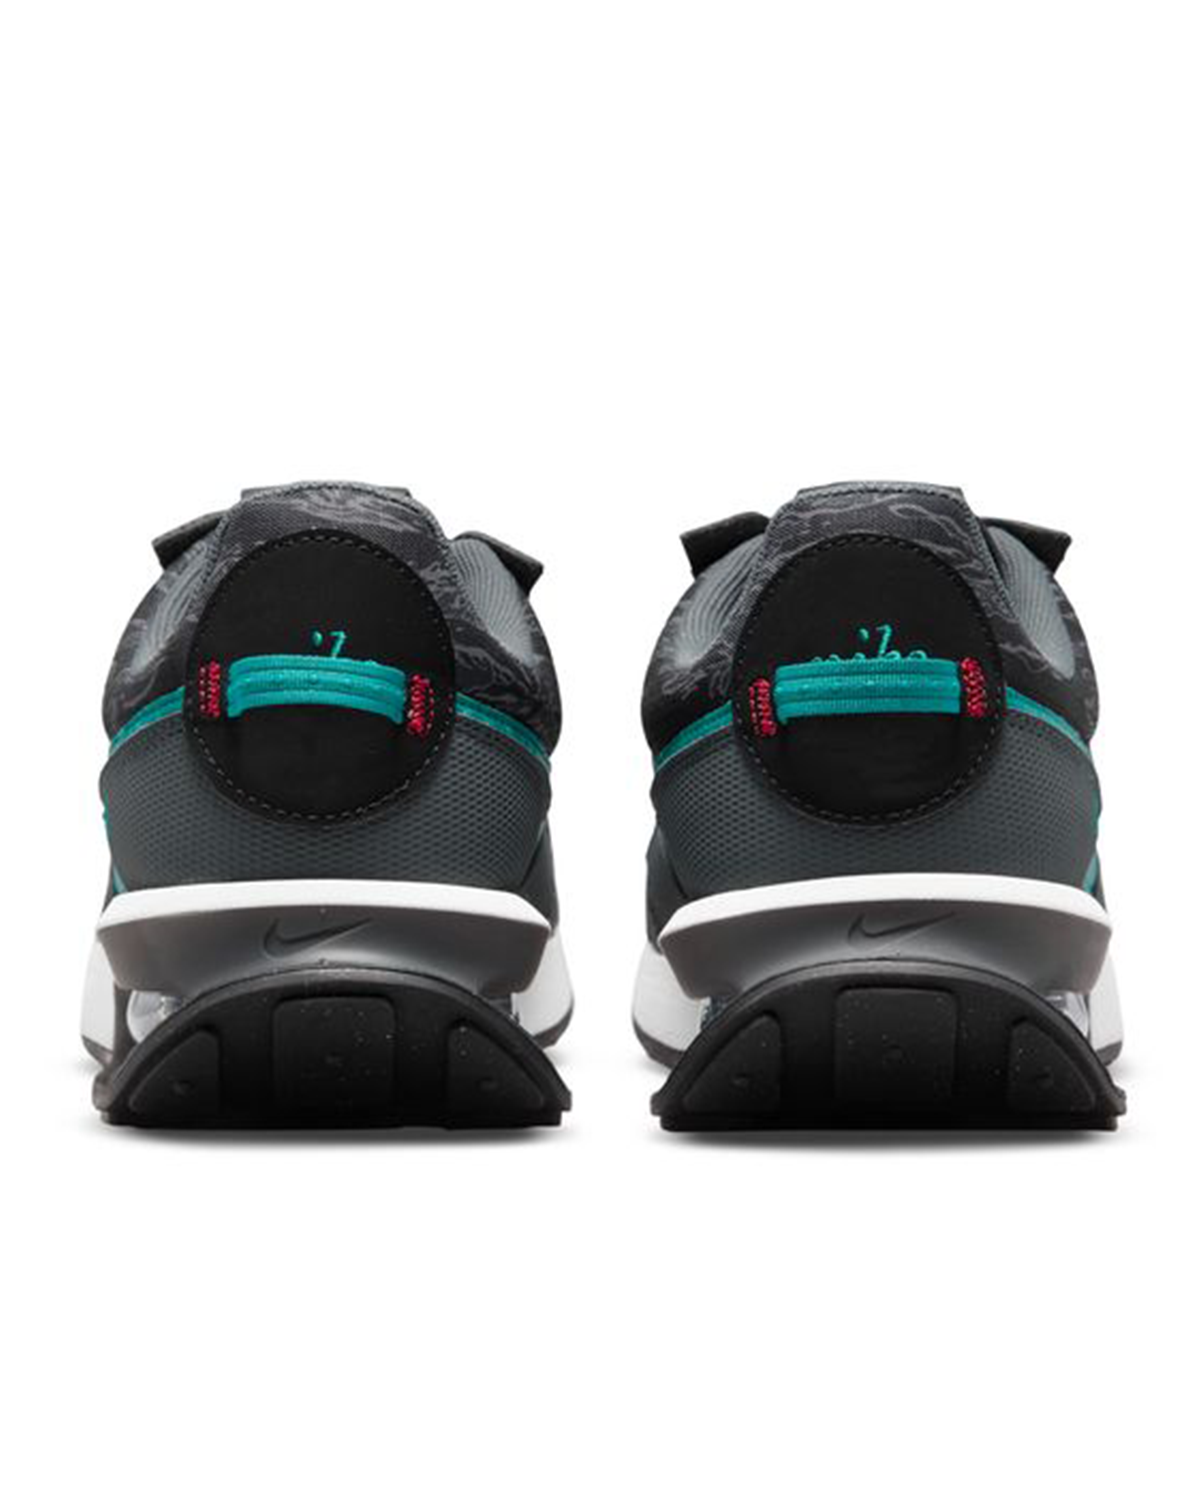 Air Max Pre-Day SE Black/Fresh Water/Anthracite